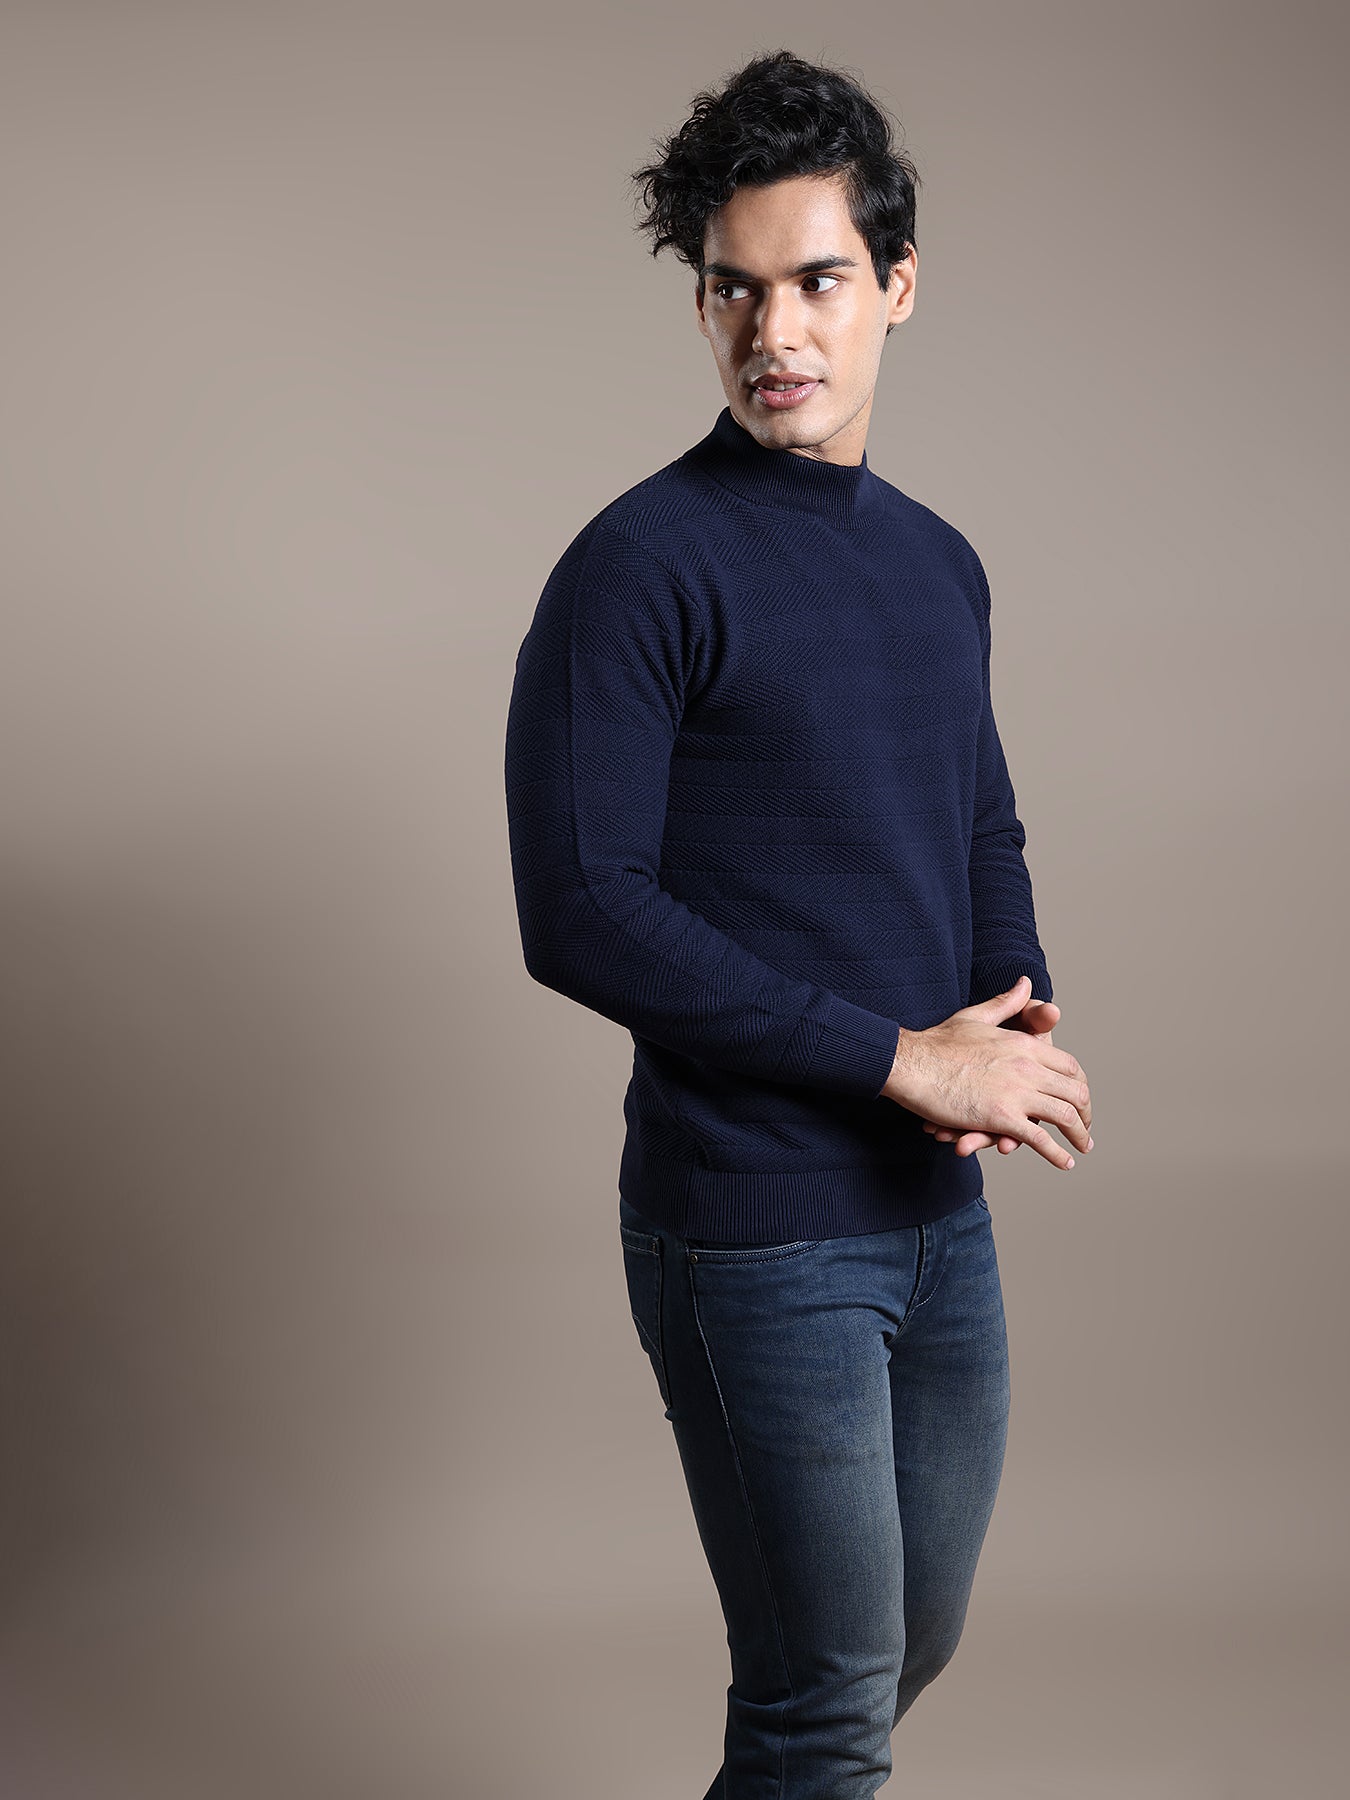 Knitted Navy Blue Plain Regular Fit Full Sleeve Casual Pullover